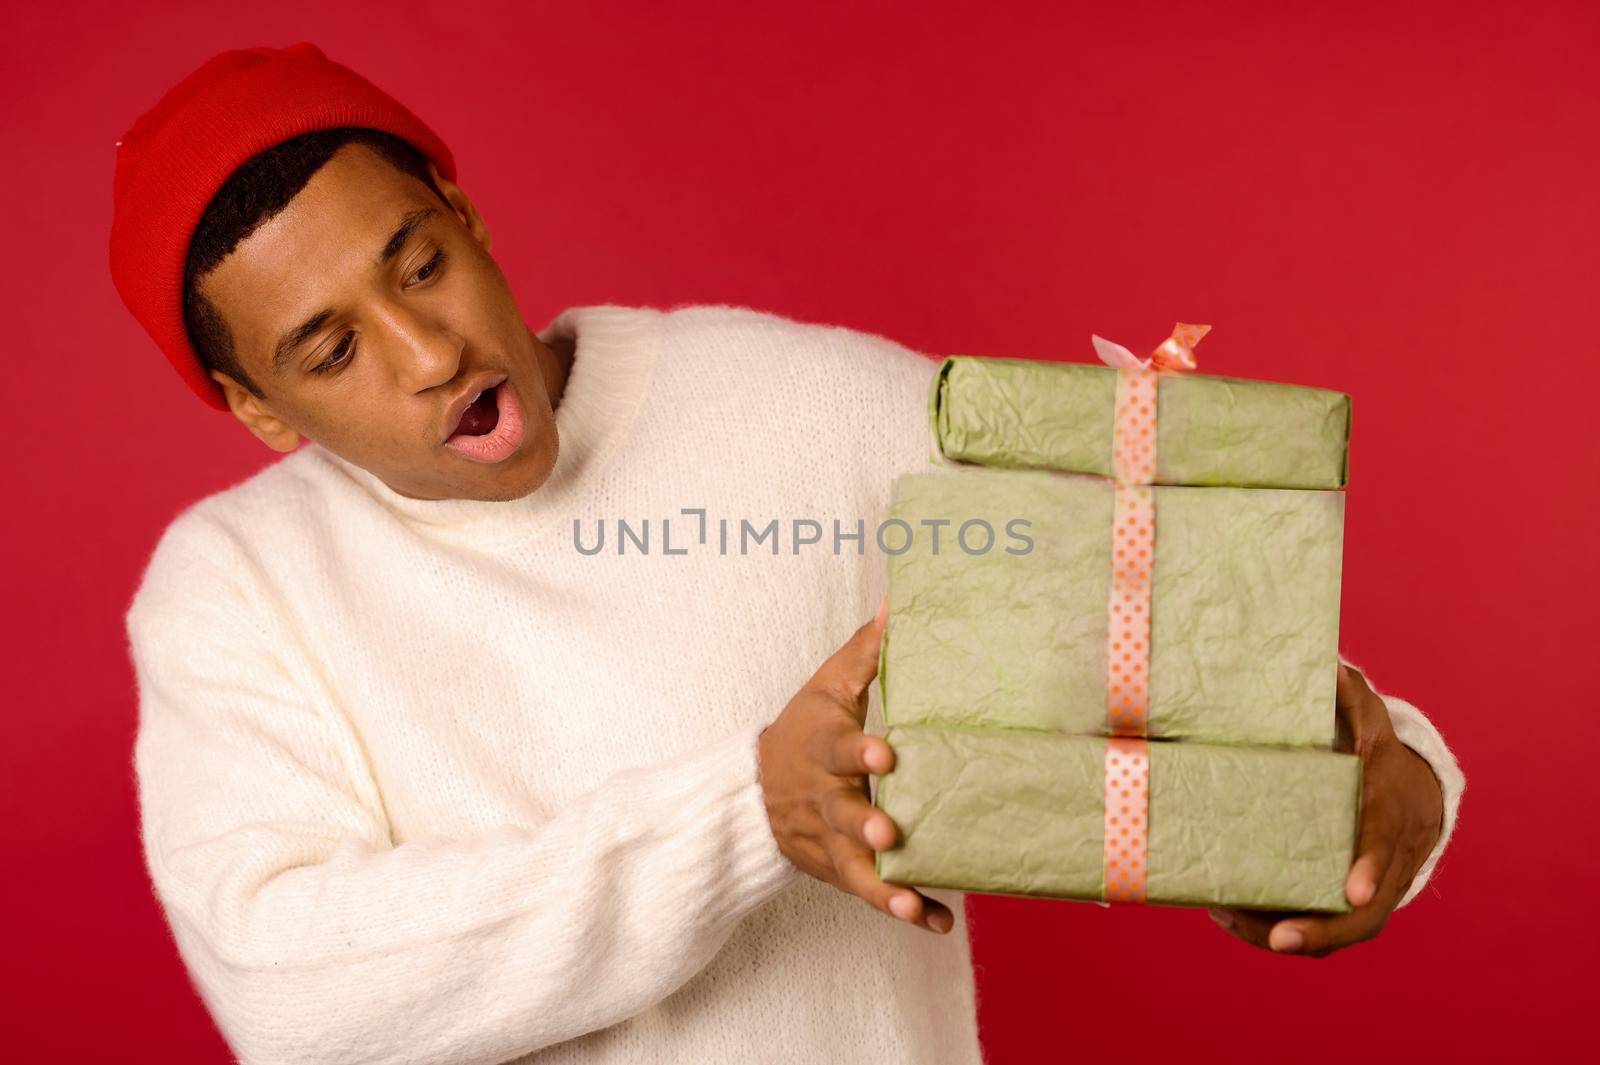 Xmas presents. Smiling dark-skinned young guy with gift boxes in hands